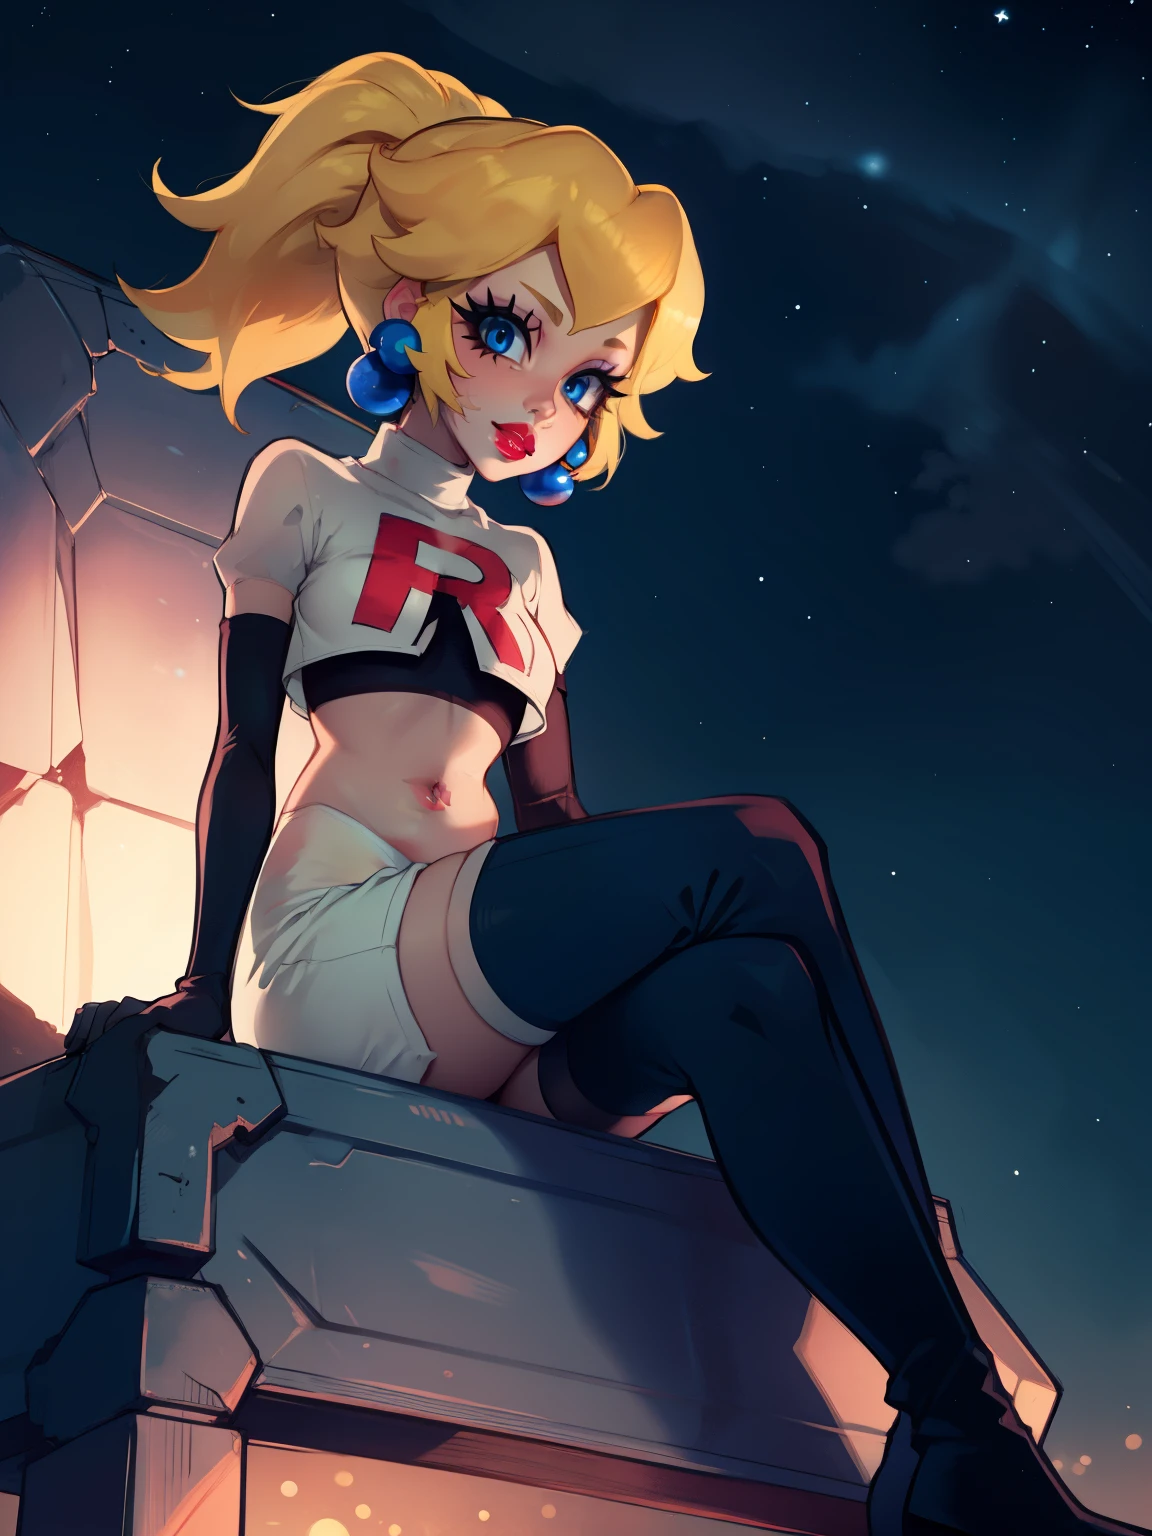 princess_peach, ponytail ,earrings ,red lipstick, blue eye shadow, heavy makeup ,team rocket uniform, red letter R, white skirt,white crop top,black thigh-high boots, black elbow gloves, evil smile, looking down on viewer, sitting down ,legs crossed, night sky background